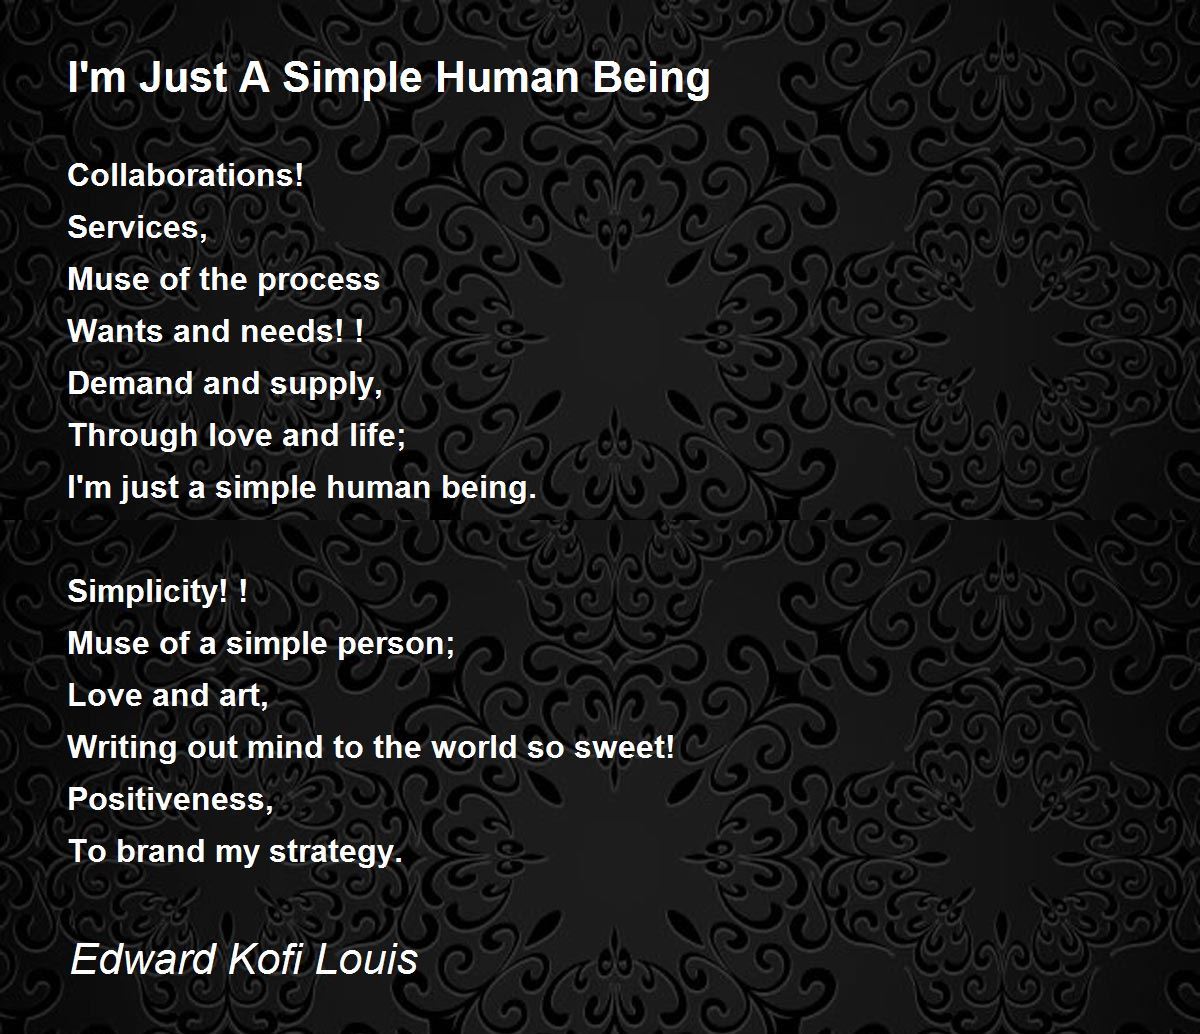 https://img.poemhunter.com/i/poem_images/951/i-m-just-a-simple-human-being.jpg